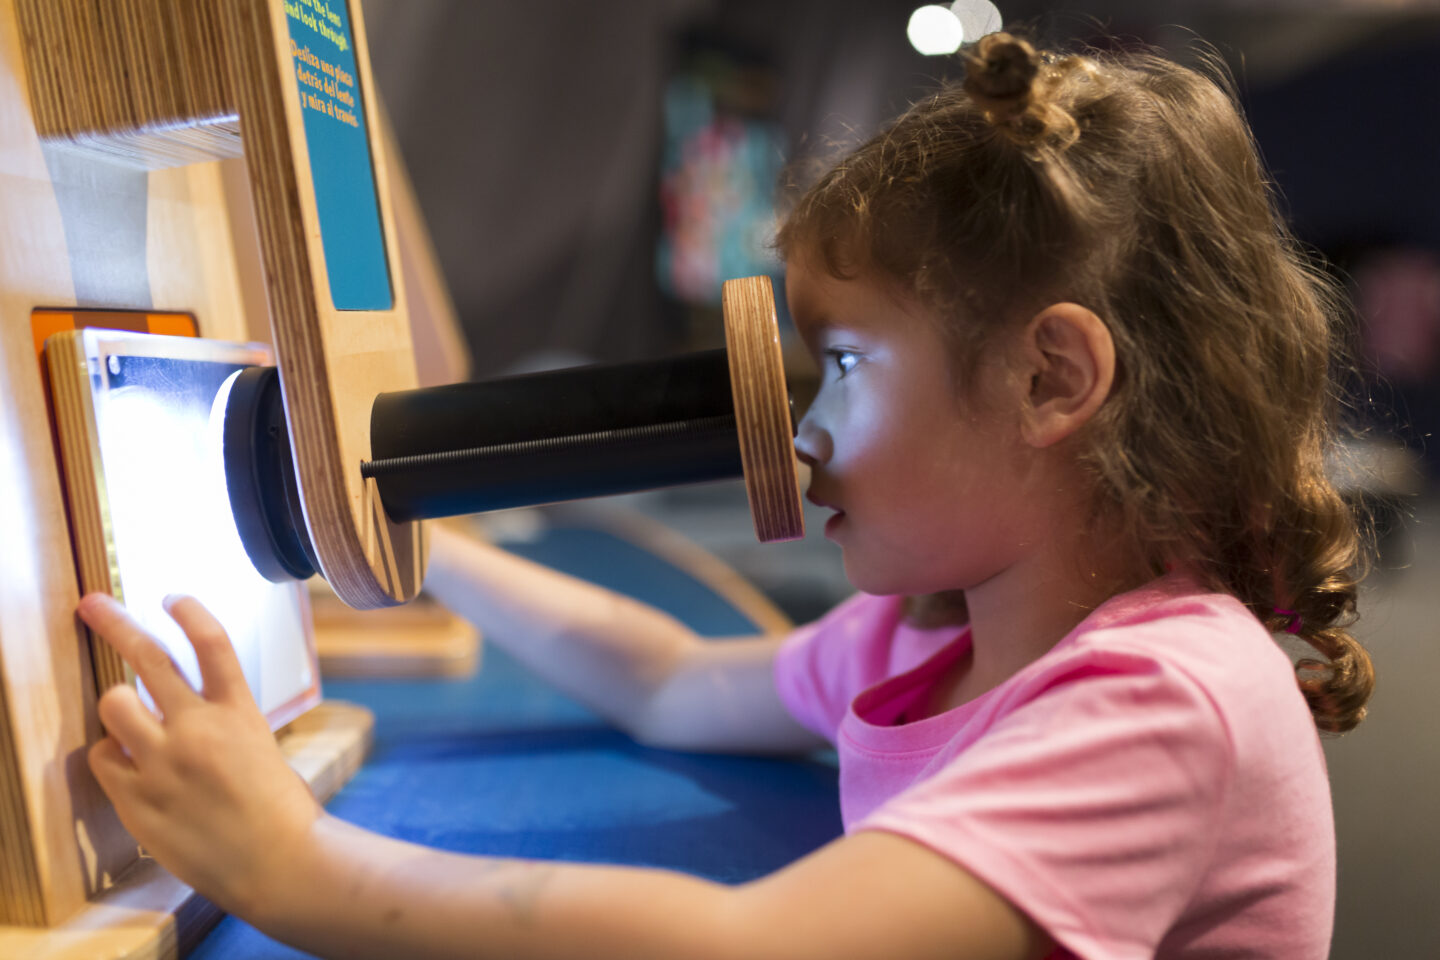 A young child is looking through a tube at a science exhibit